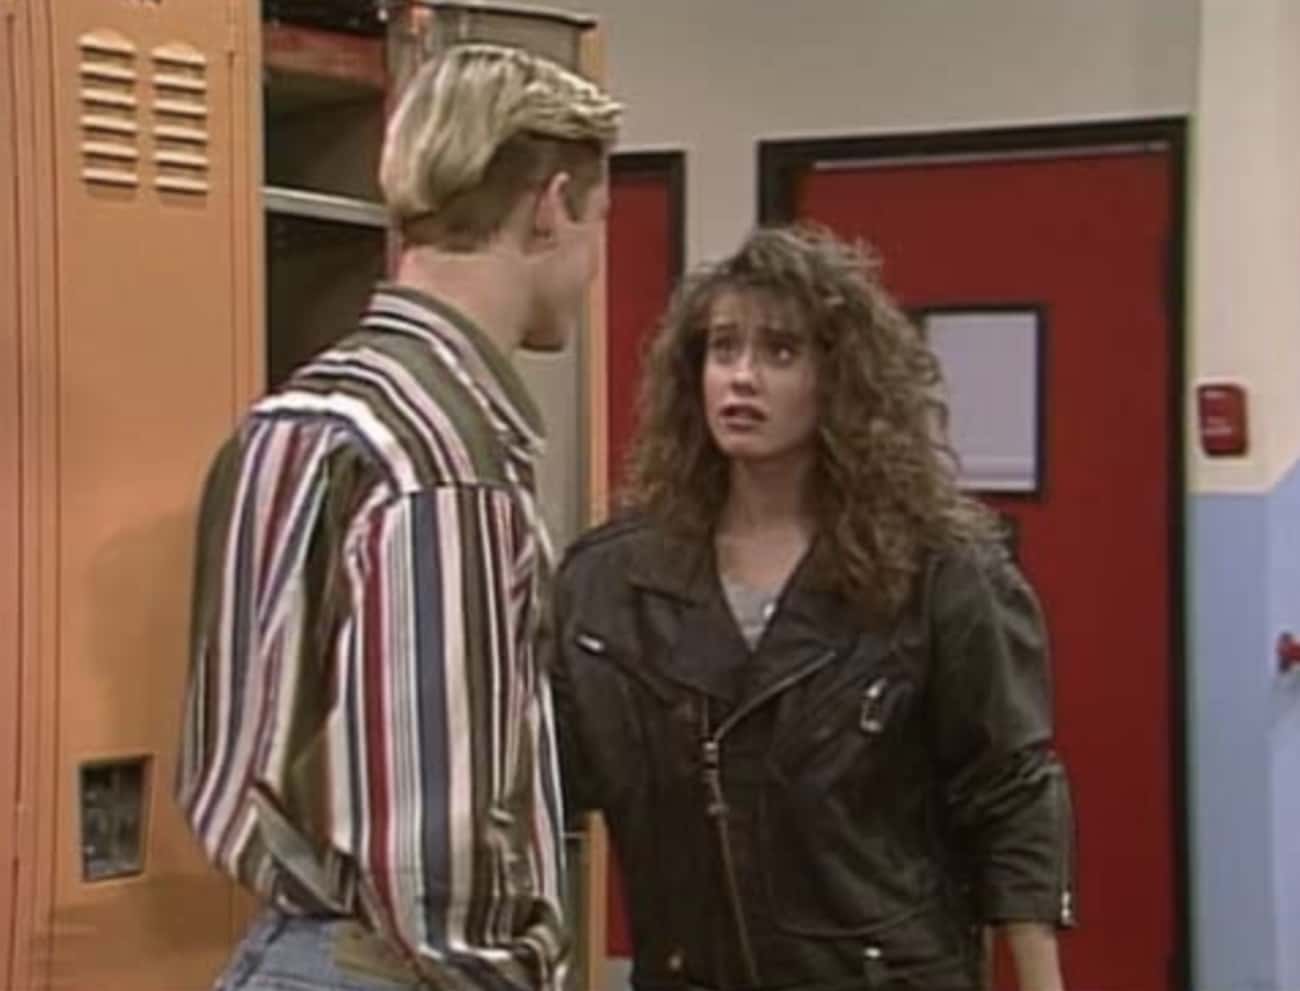 Tori In 'Saved by the Bell'